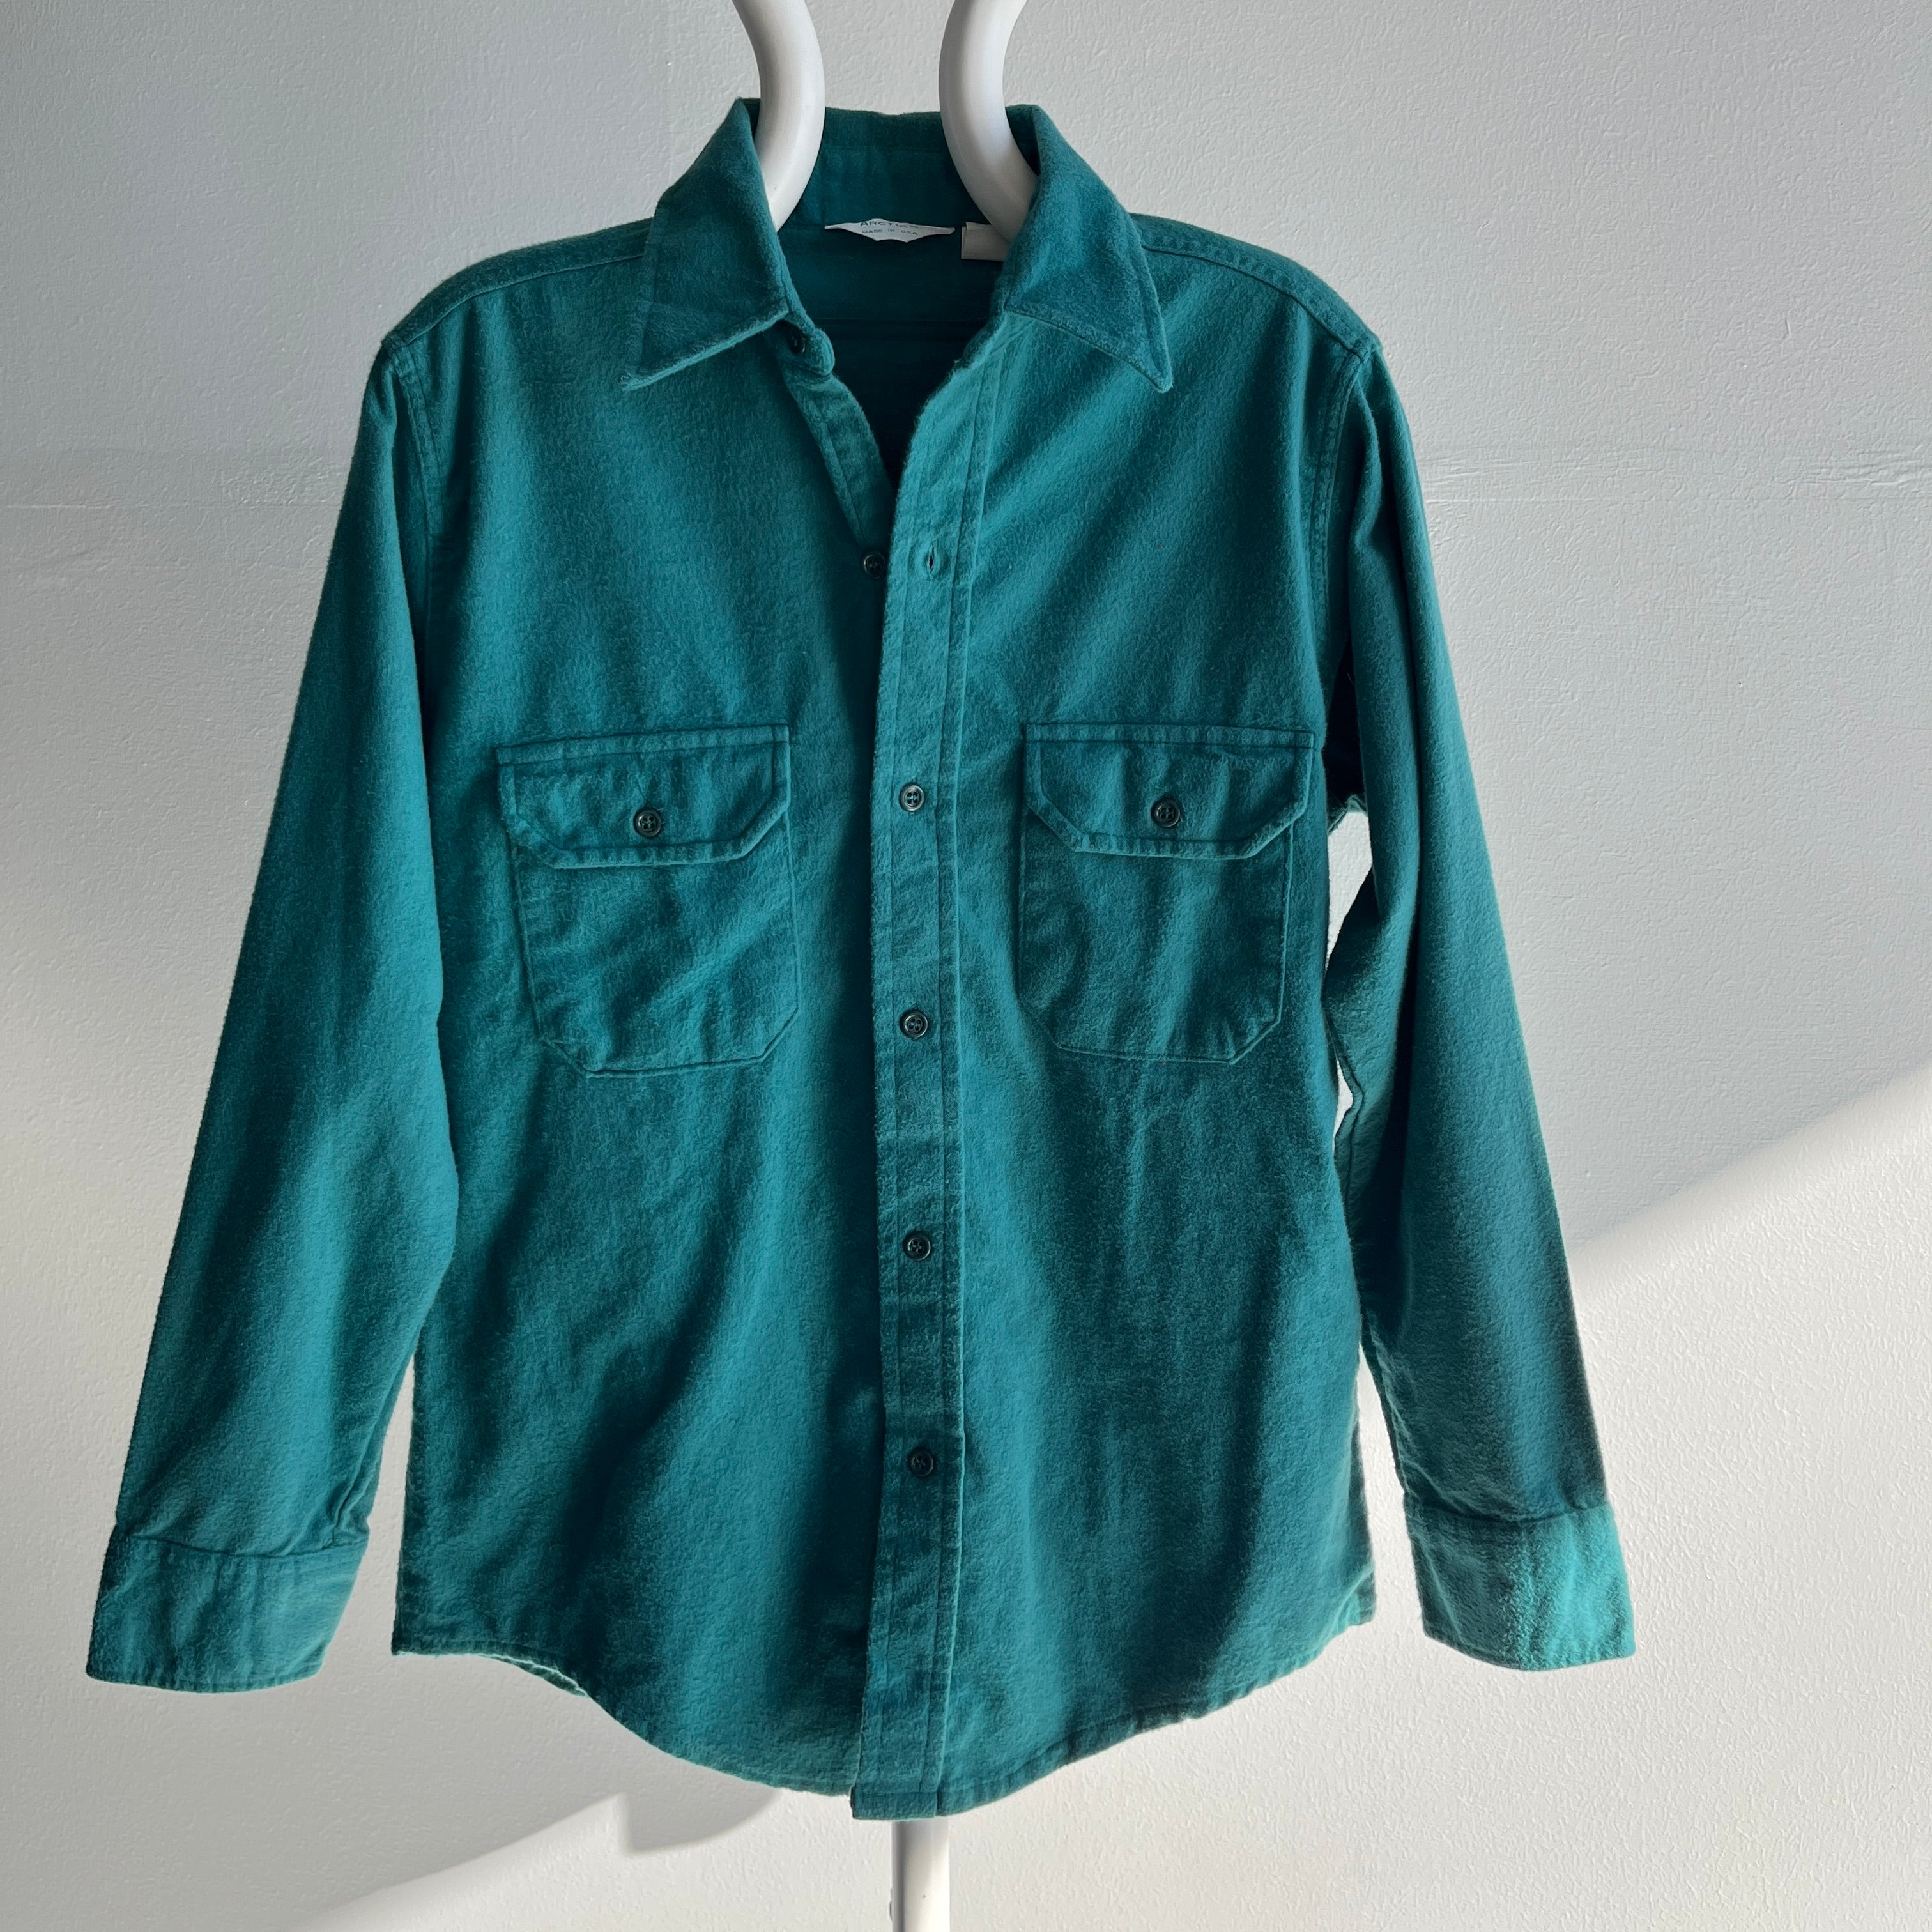 1980s Thin and Super Soft Arctic USA Made Flannel - Lightweight